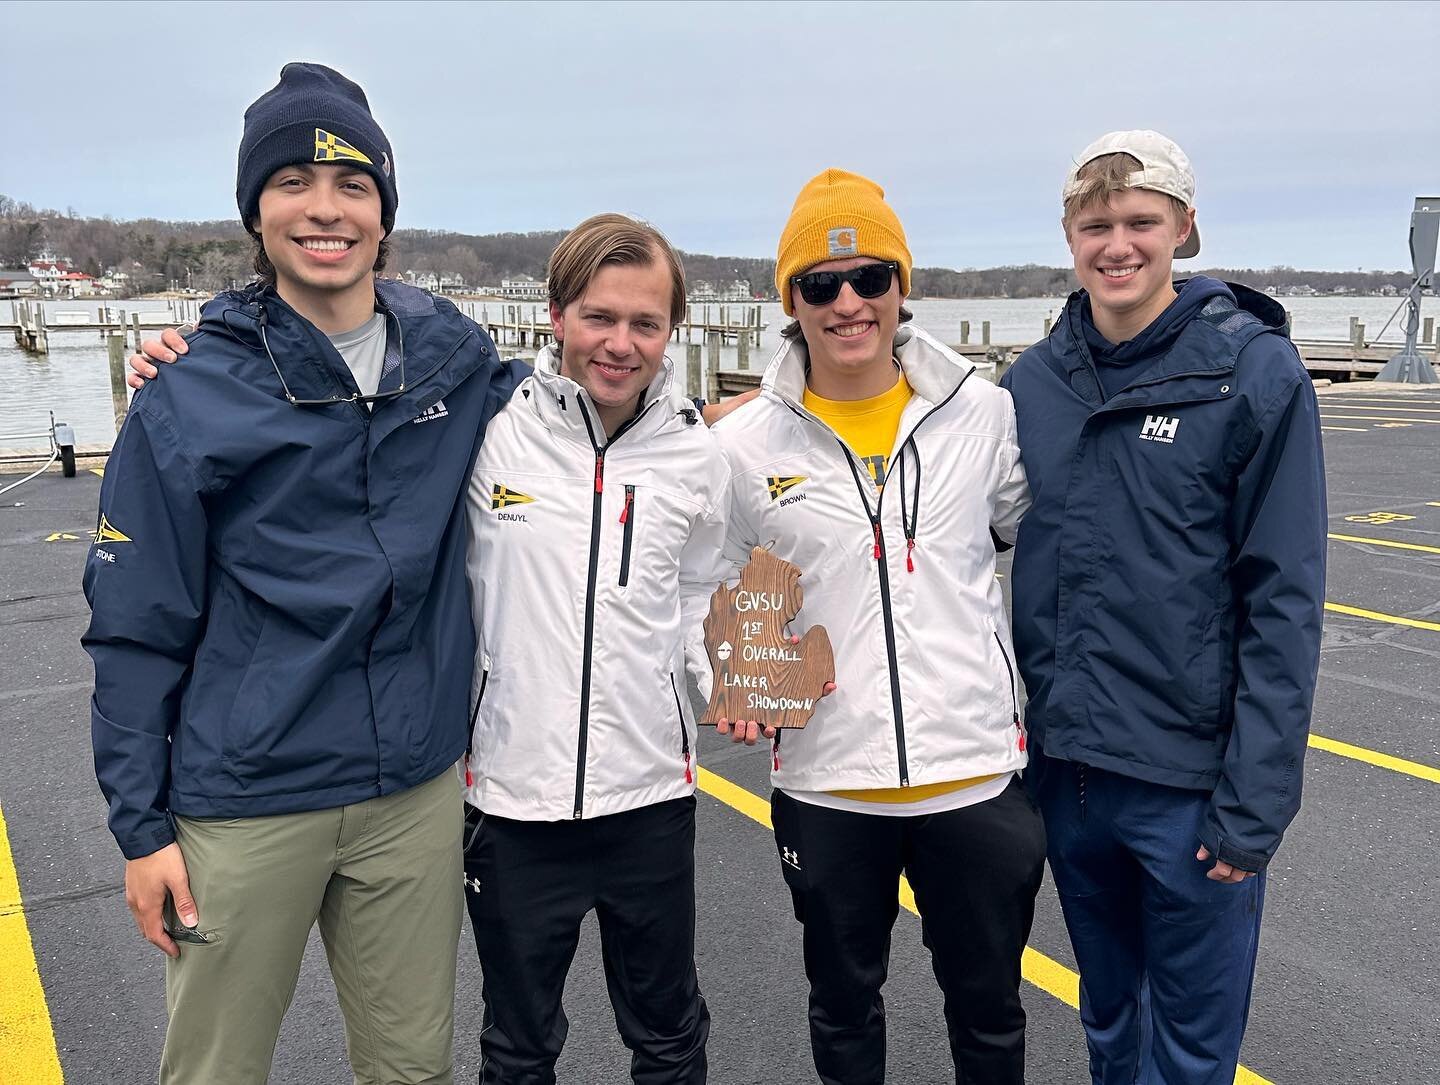 The Wolverines had a busy weekend! In addition to winning Women&rsquo;s Team Race and qualifying for nationals, our team at Laker Showdown also took home the title! We also had a team at J70 Invite who placed 7th, and our women&rsquo;s team at Women&